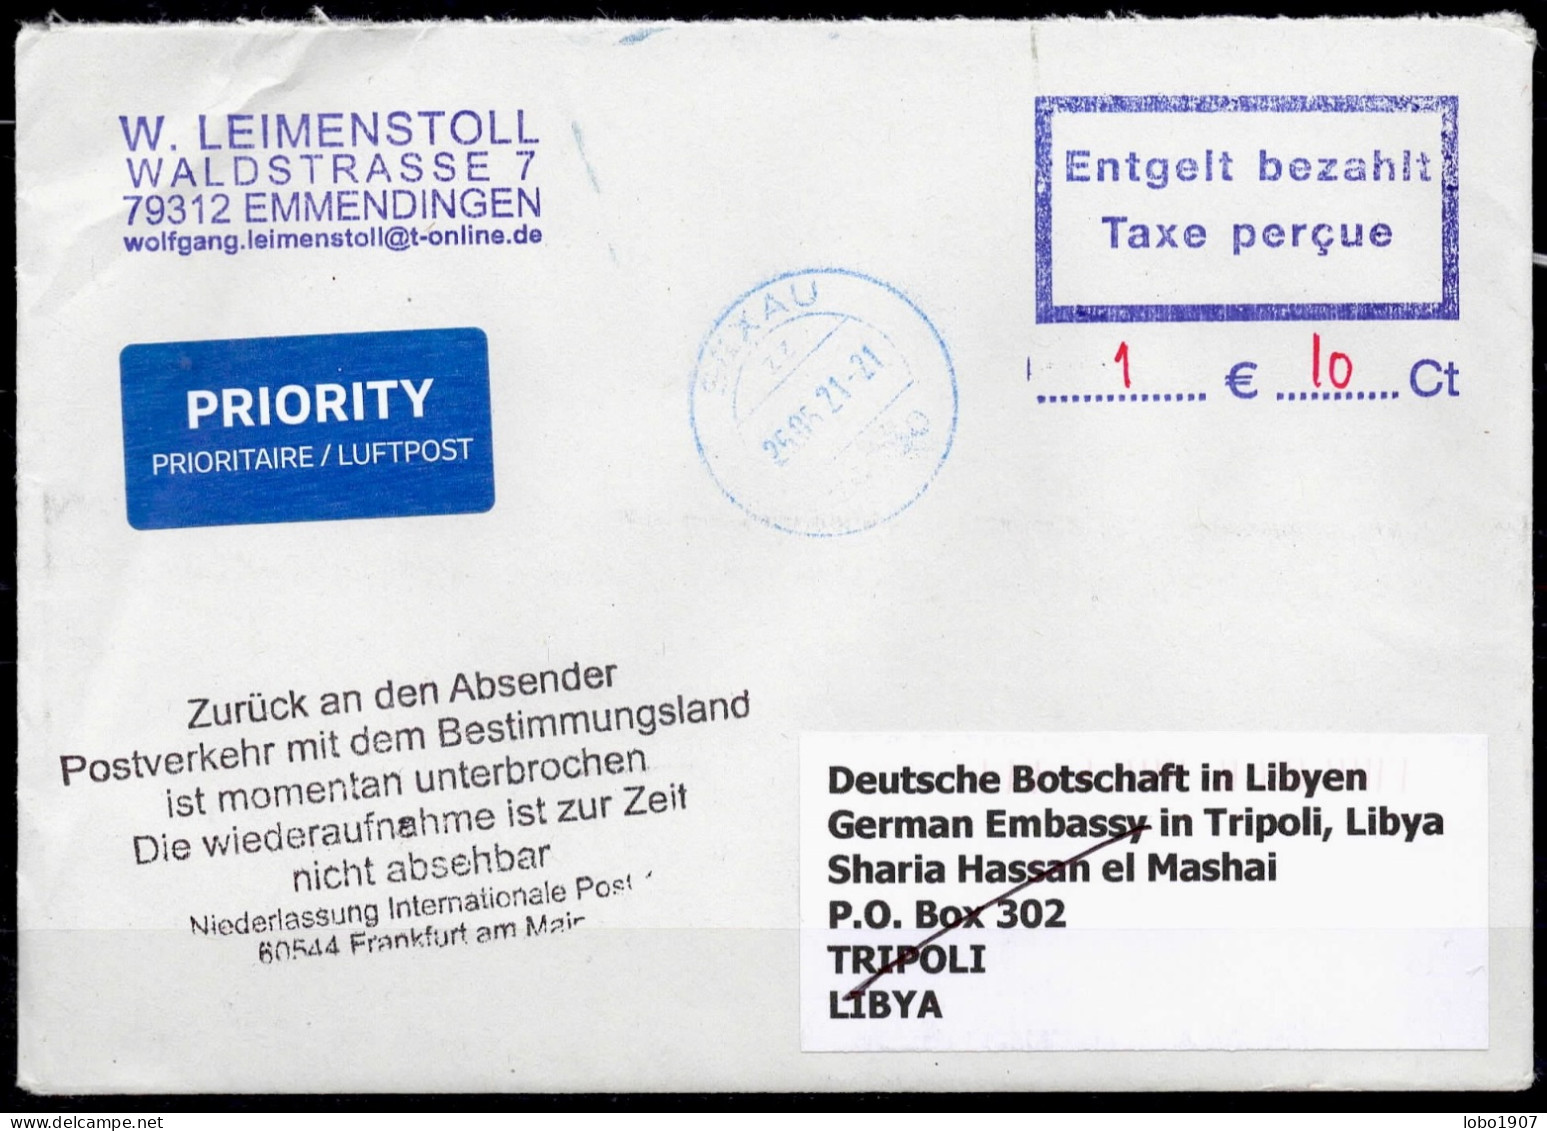 Corona Covid 19 Postal Service Interruption "Zurück An Den Absender... " ( 74x29mm )  Reply Coupon Paid Cover To LYBIA - Libye